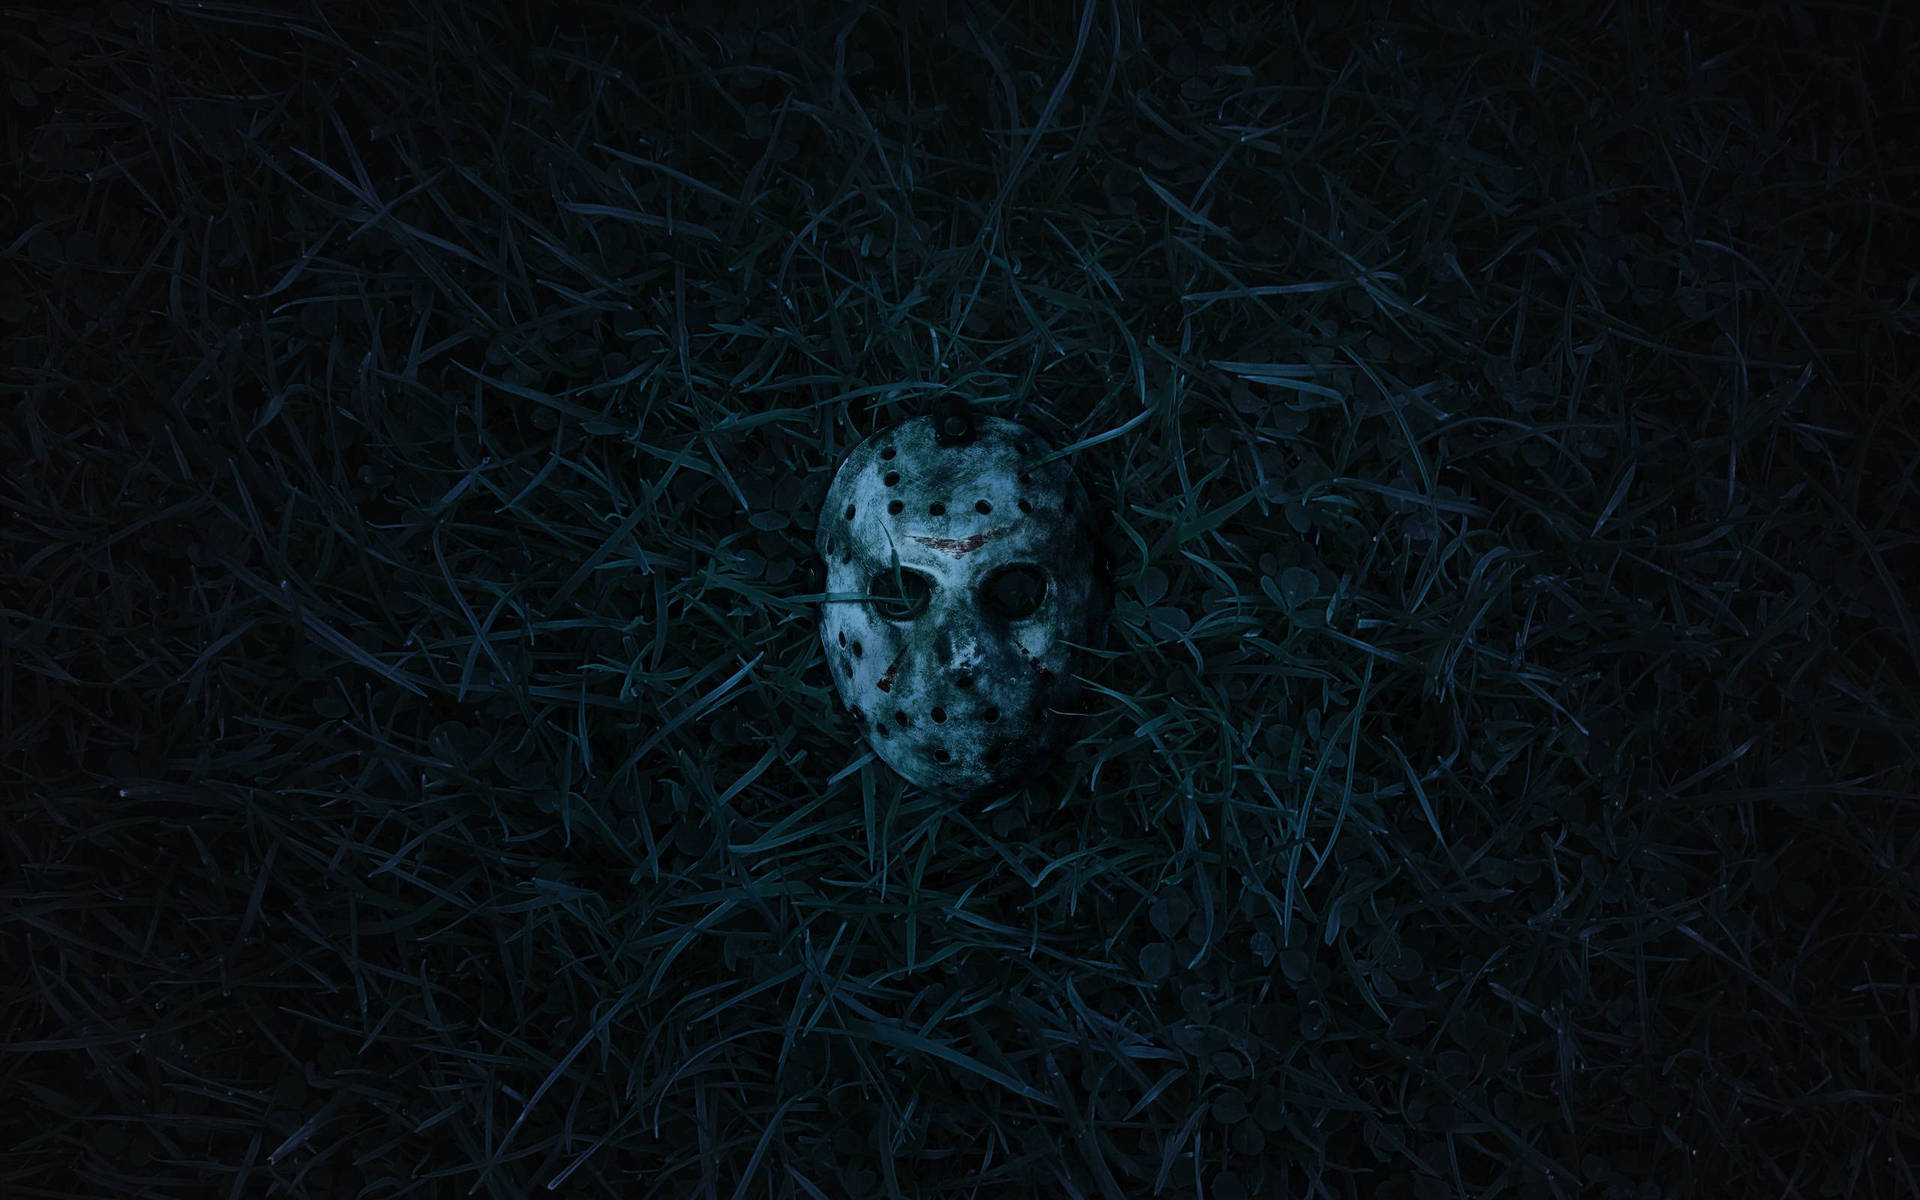 Friday The 13th Mask In Grass